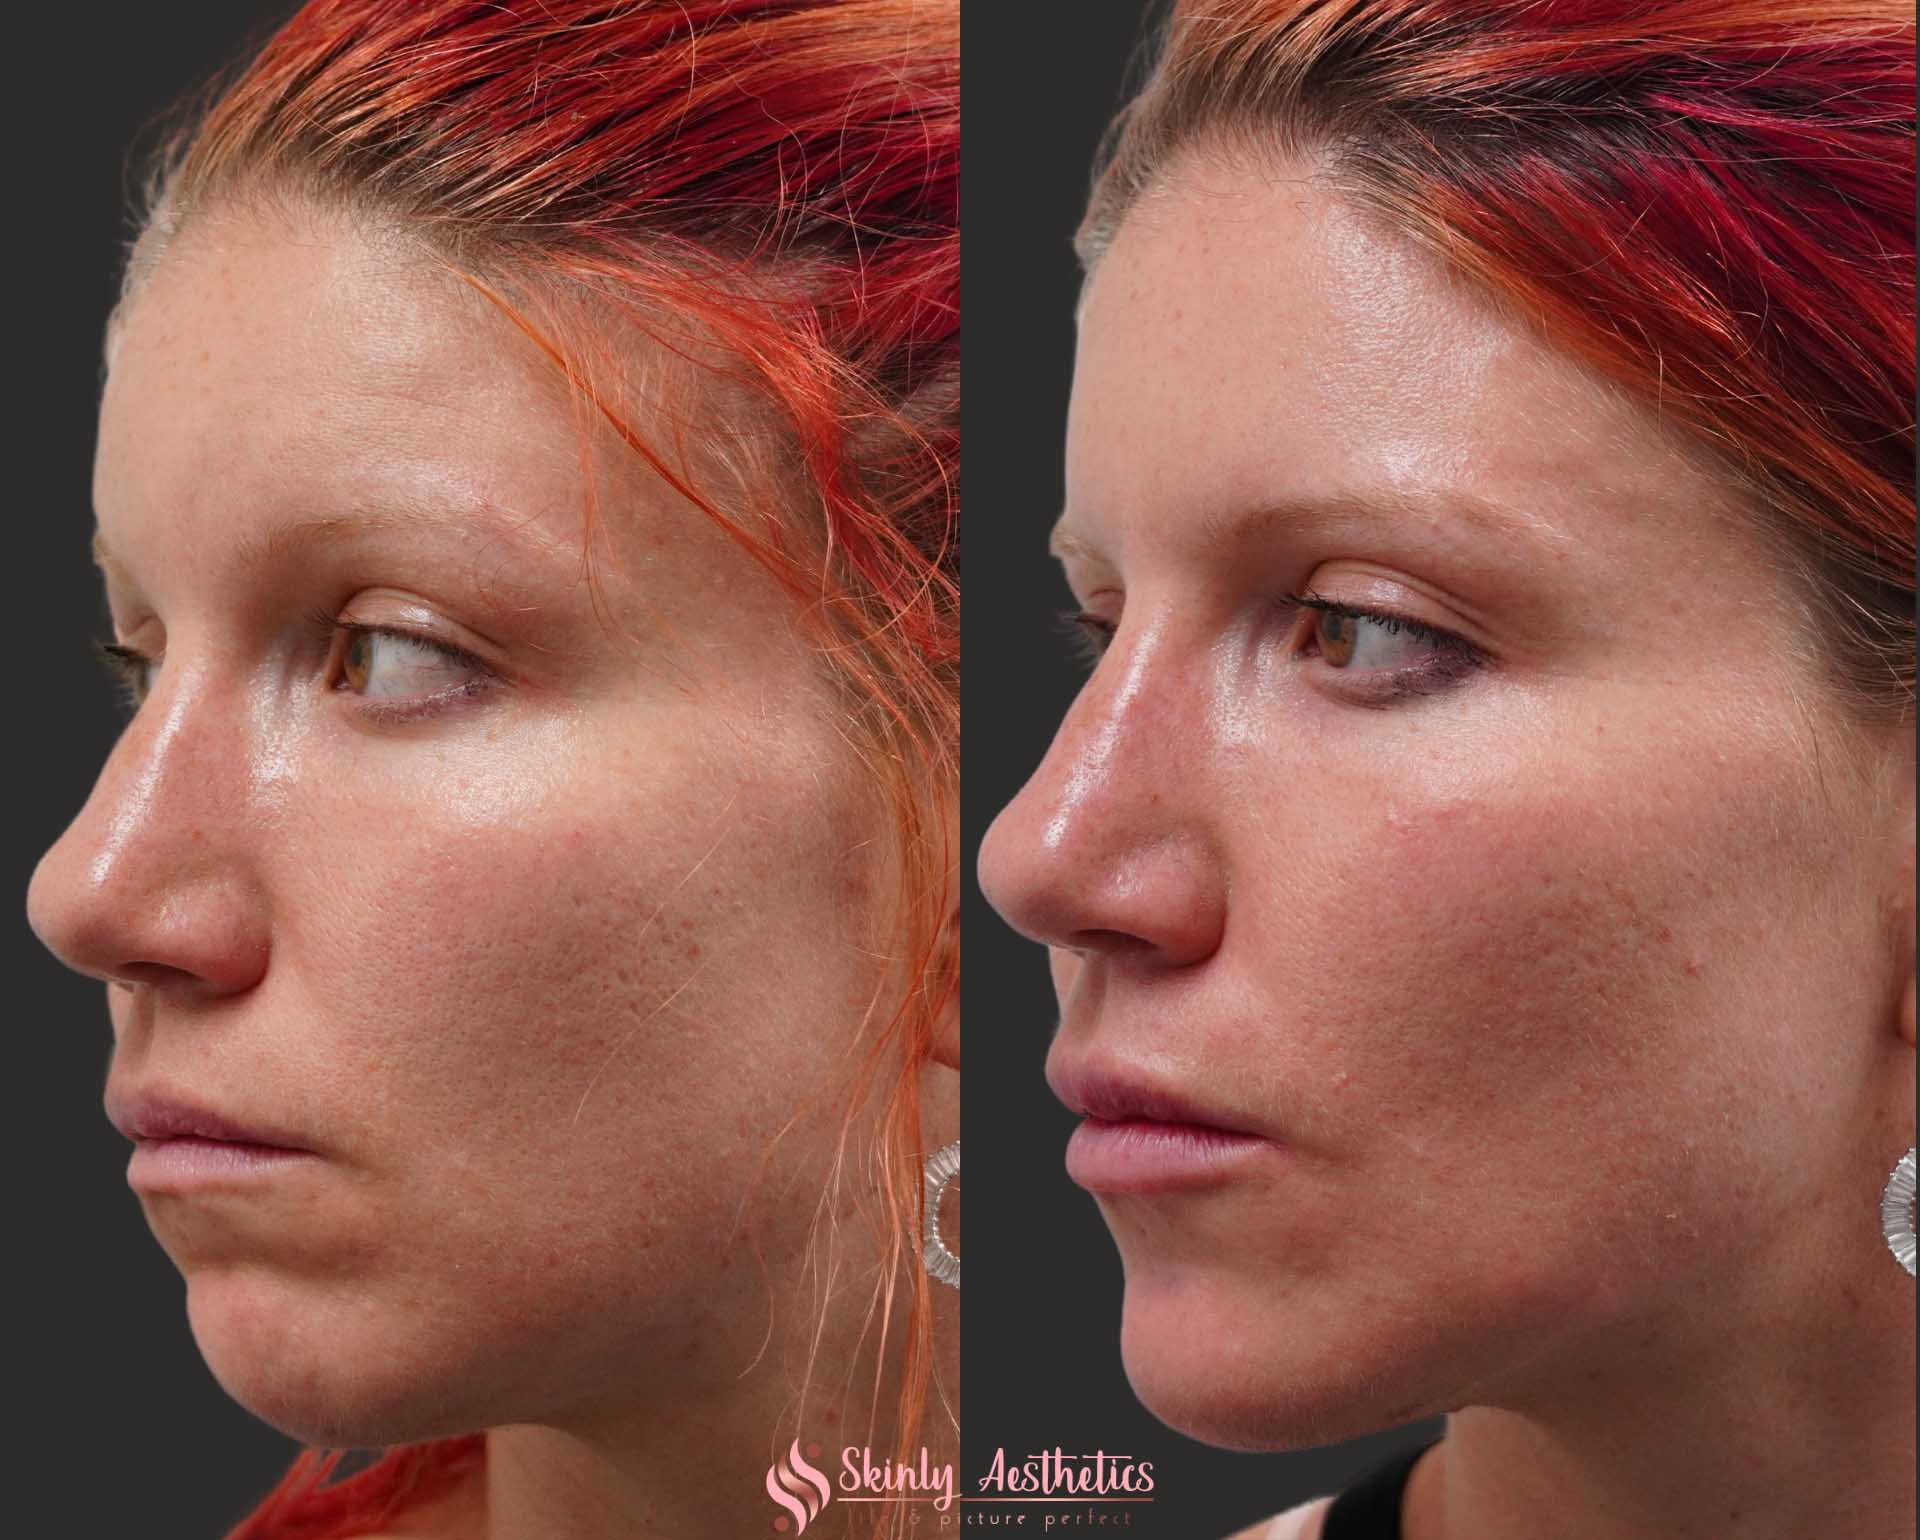 Juvederm dermal filler chin augmentation before and after results